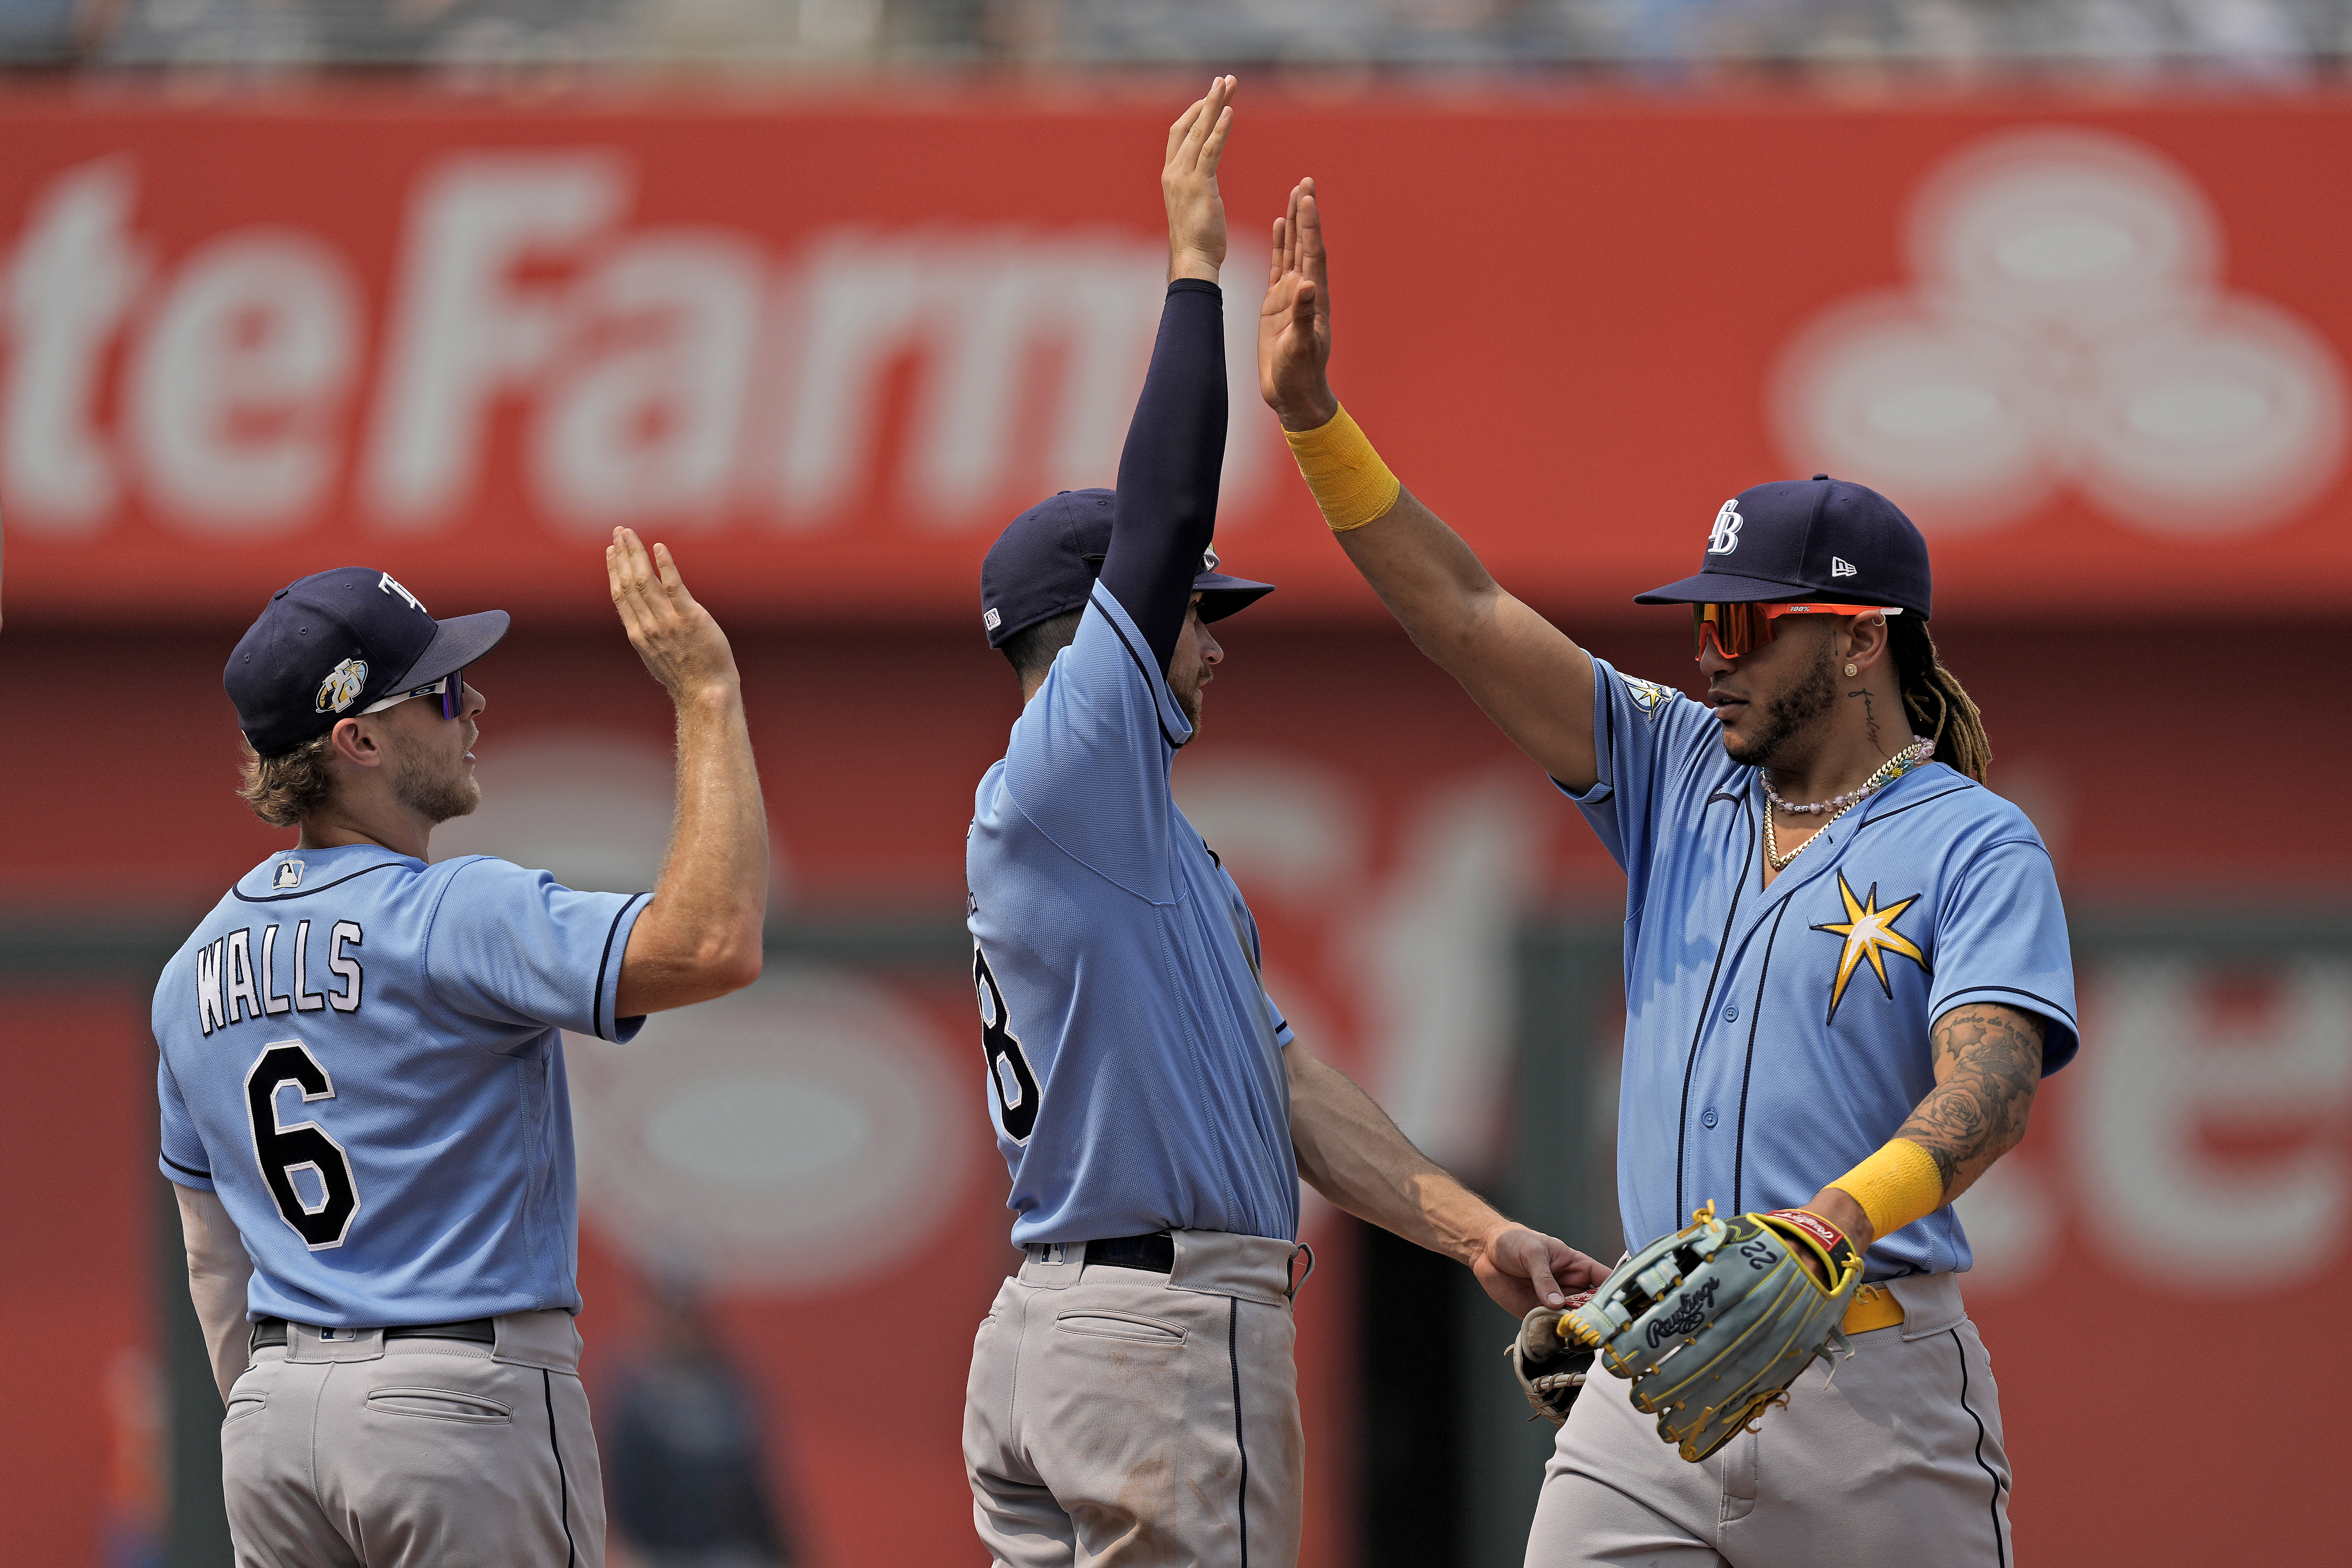 Jose Siri homers twice as Rays down Royals in Game 1